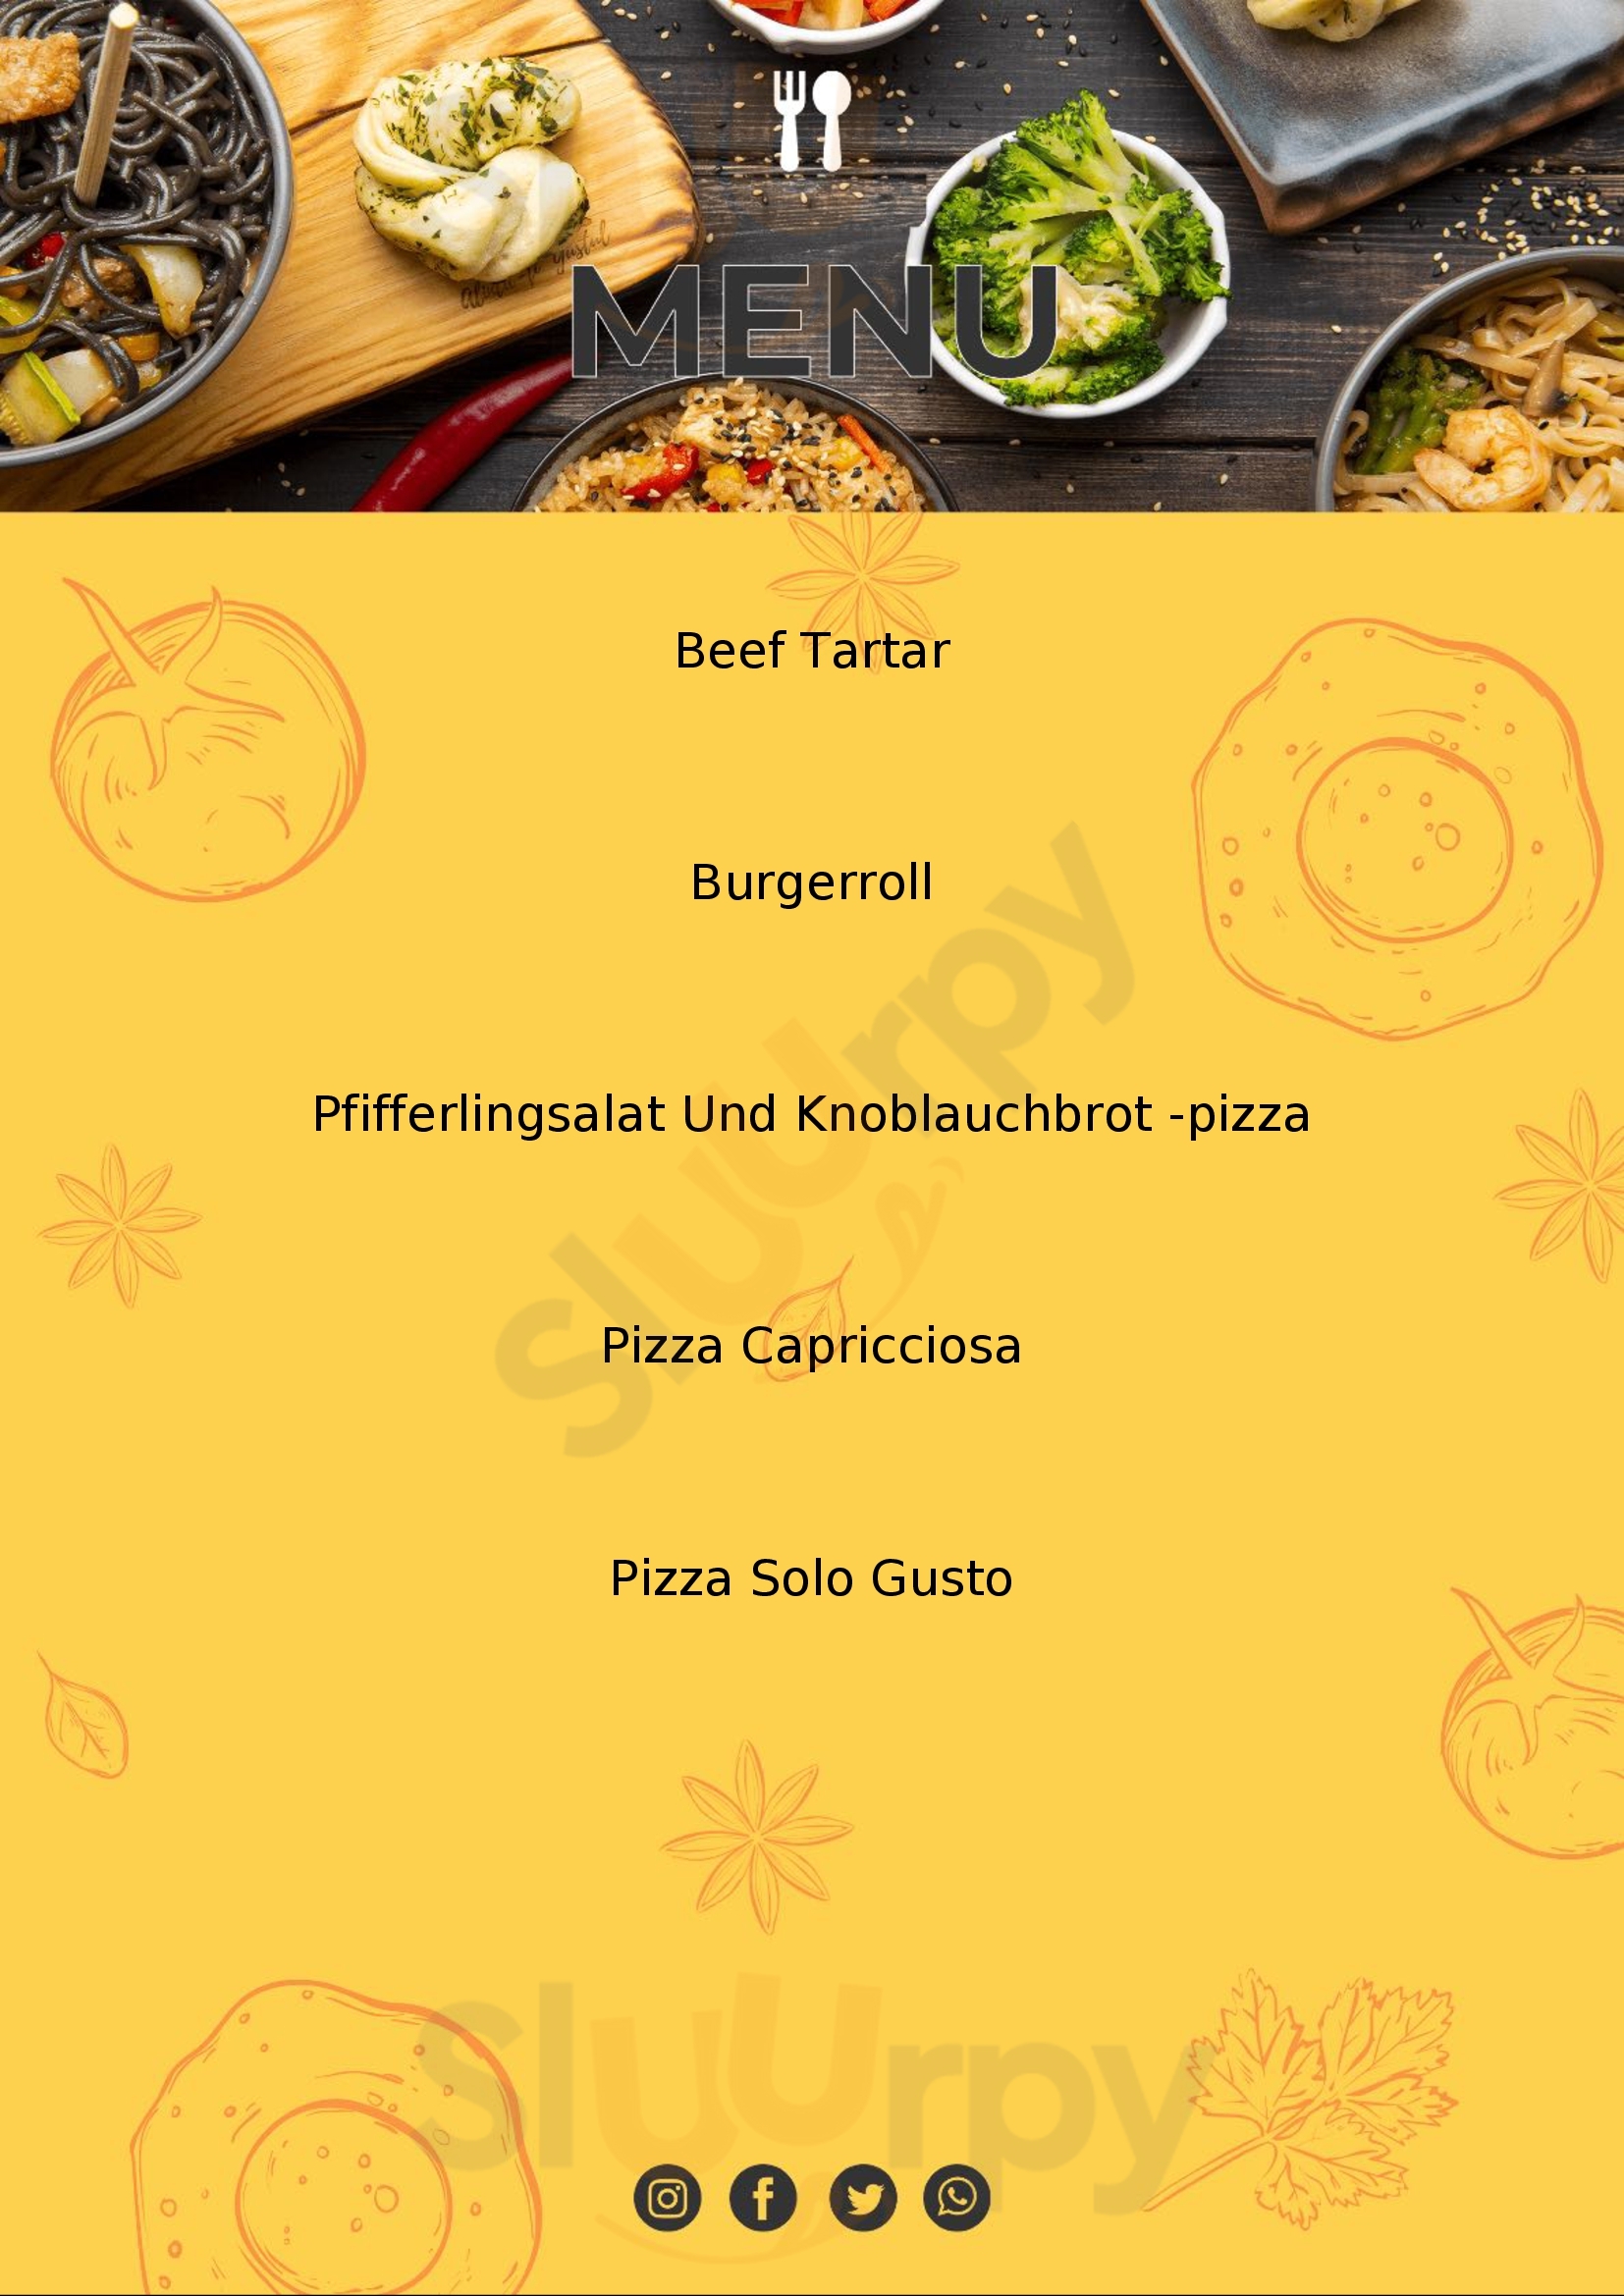 Solo Gusto Mils bei Solbad Hall Menu - 1